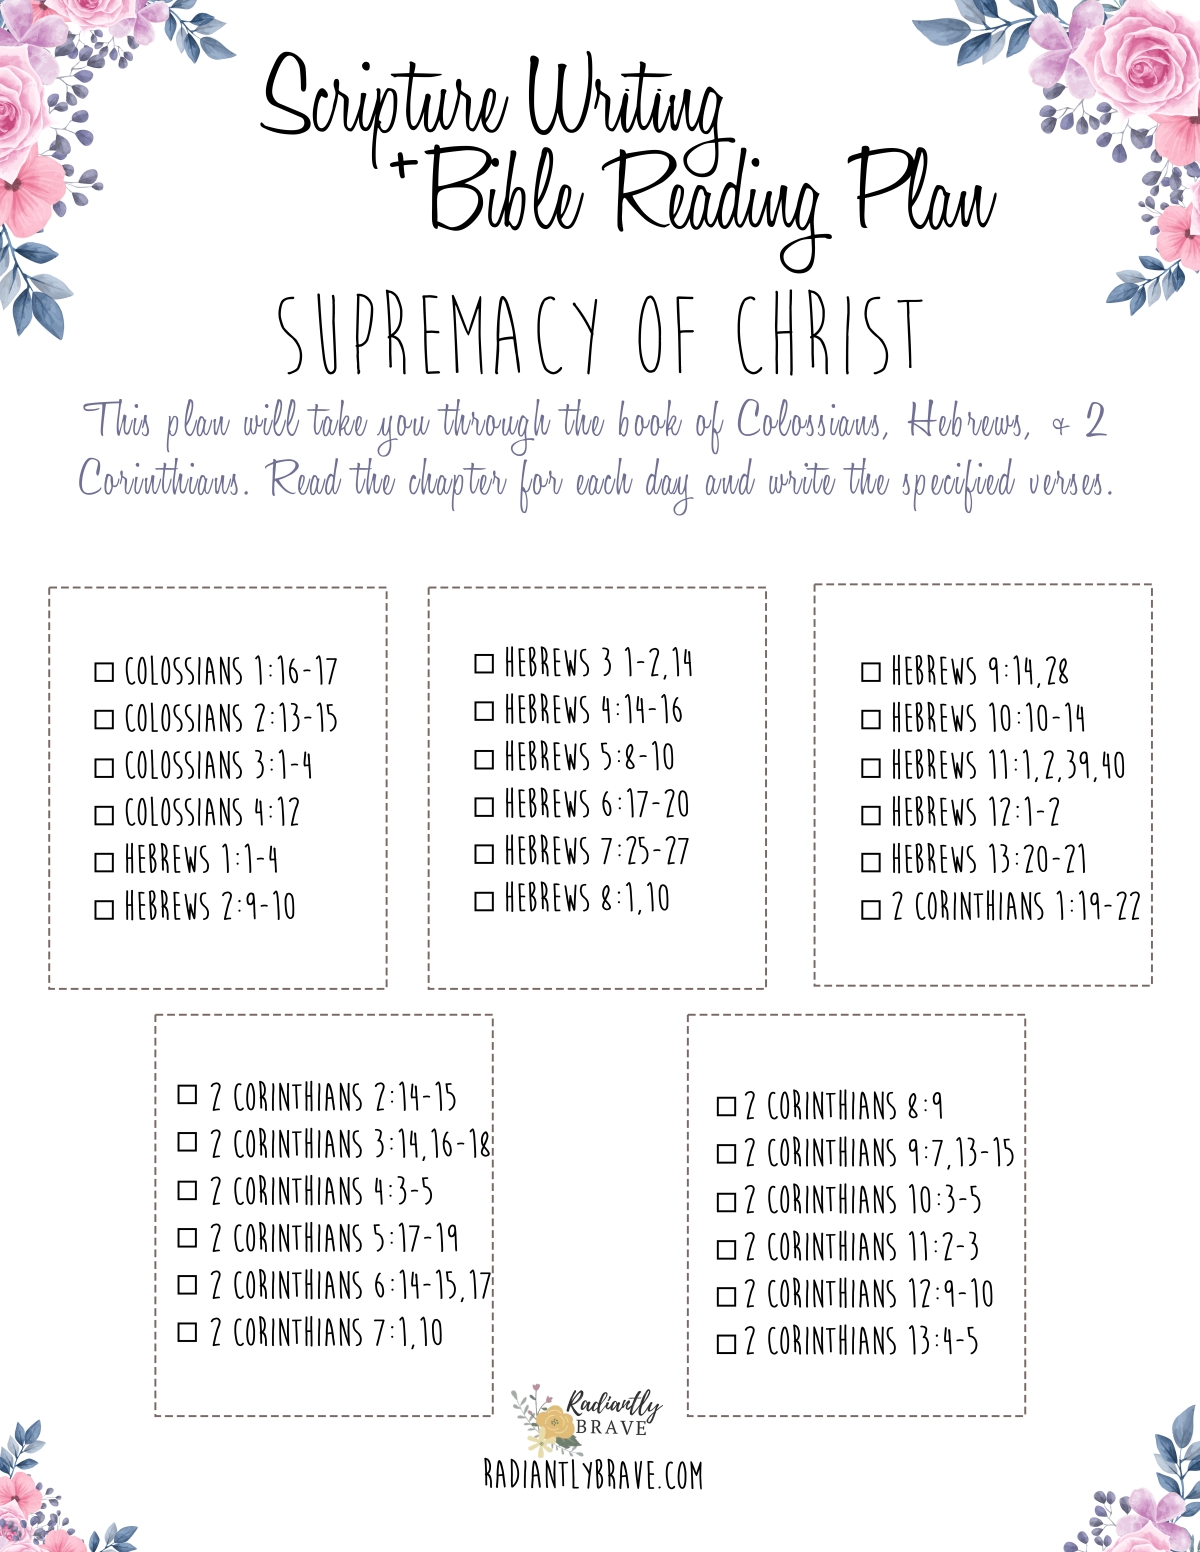 Scripture Writing: The Supremacy of Christ